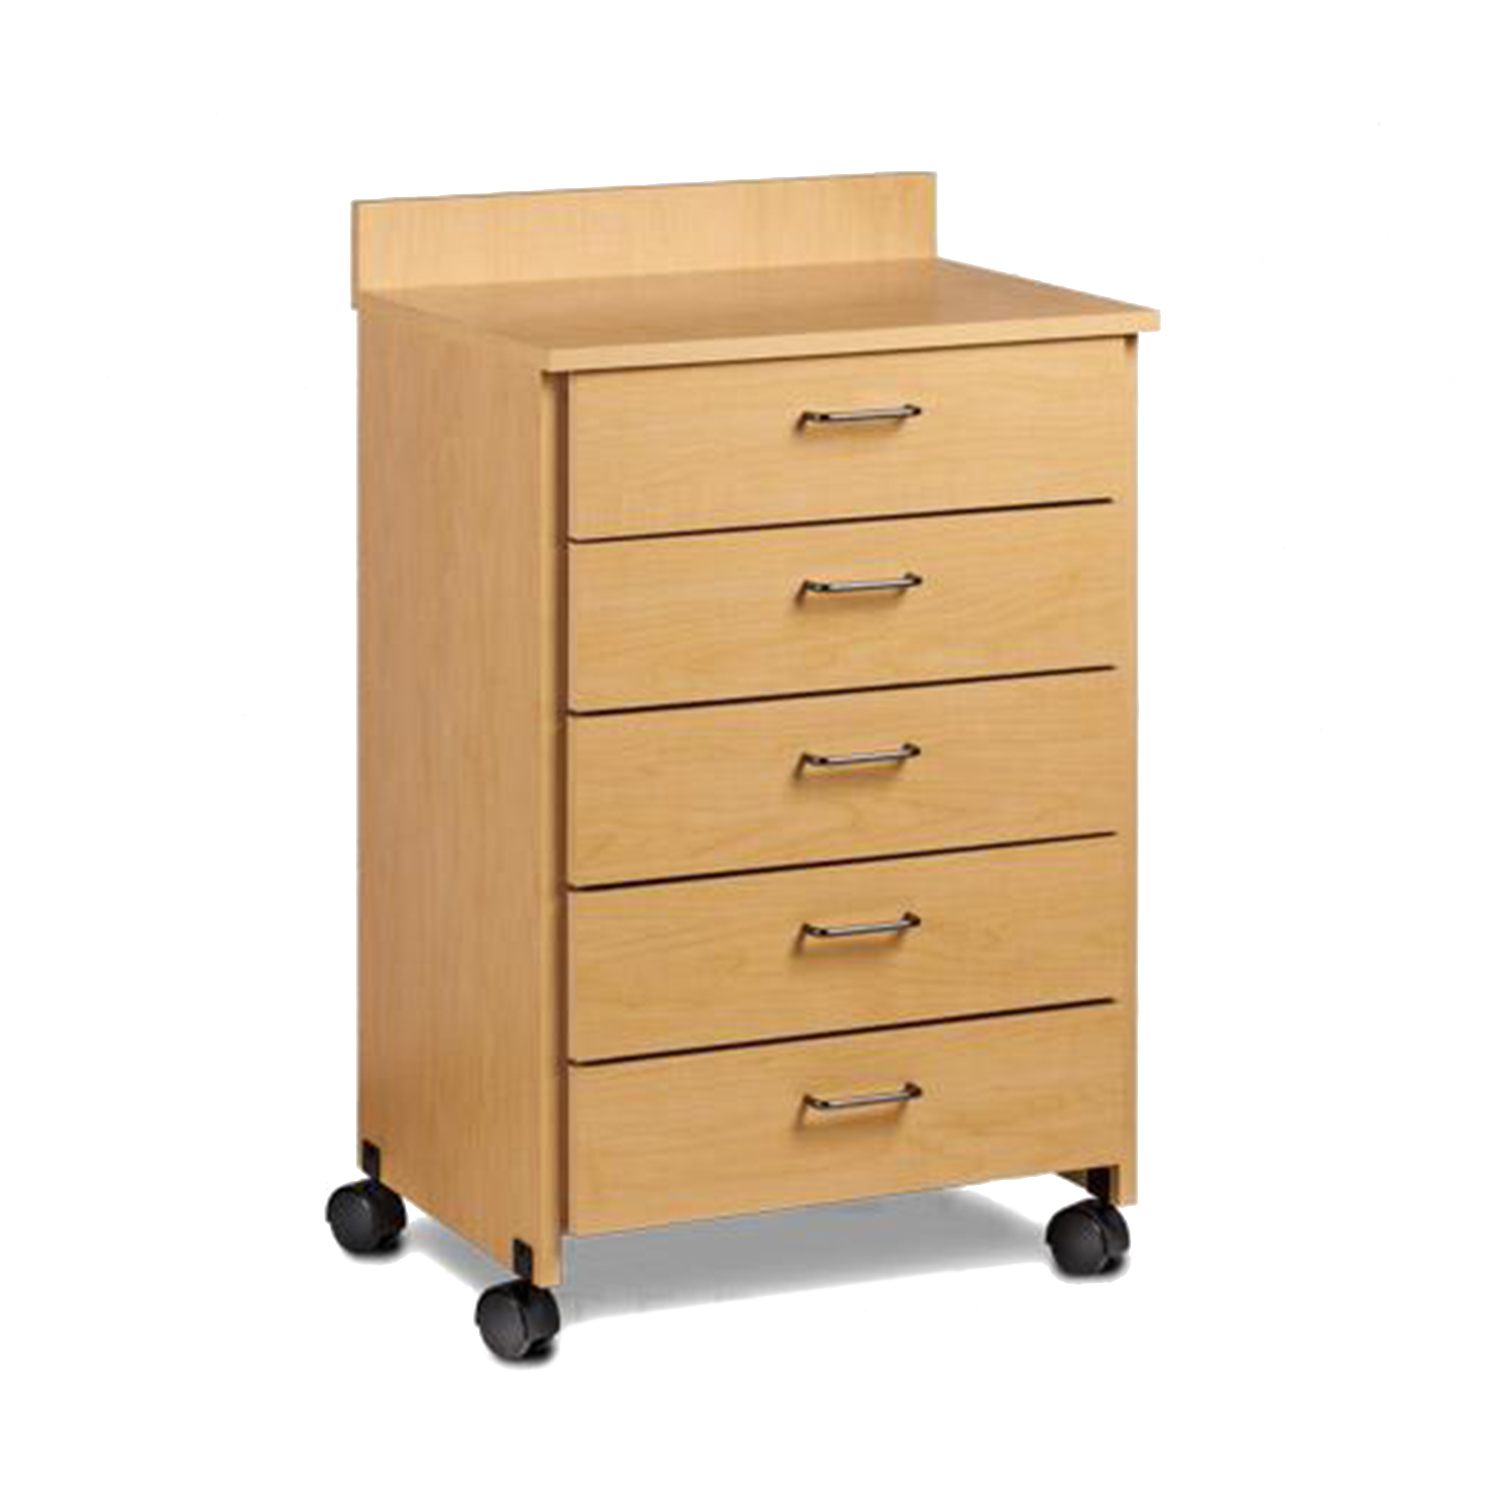 Mobile Treatment Cabinet with 5 Drawers